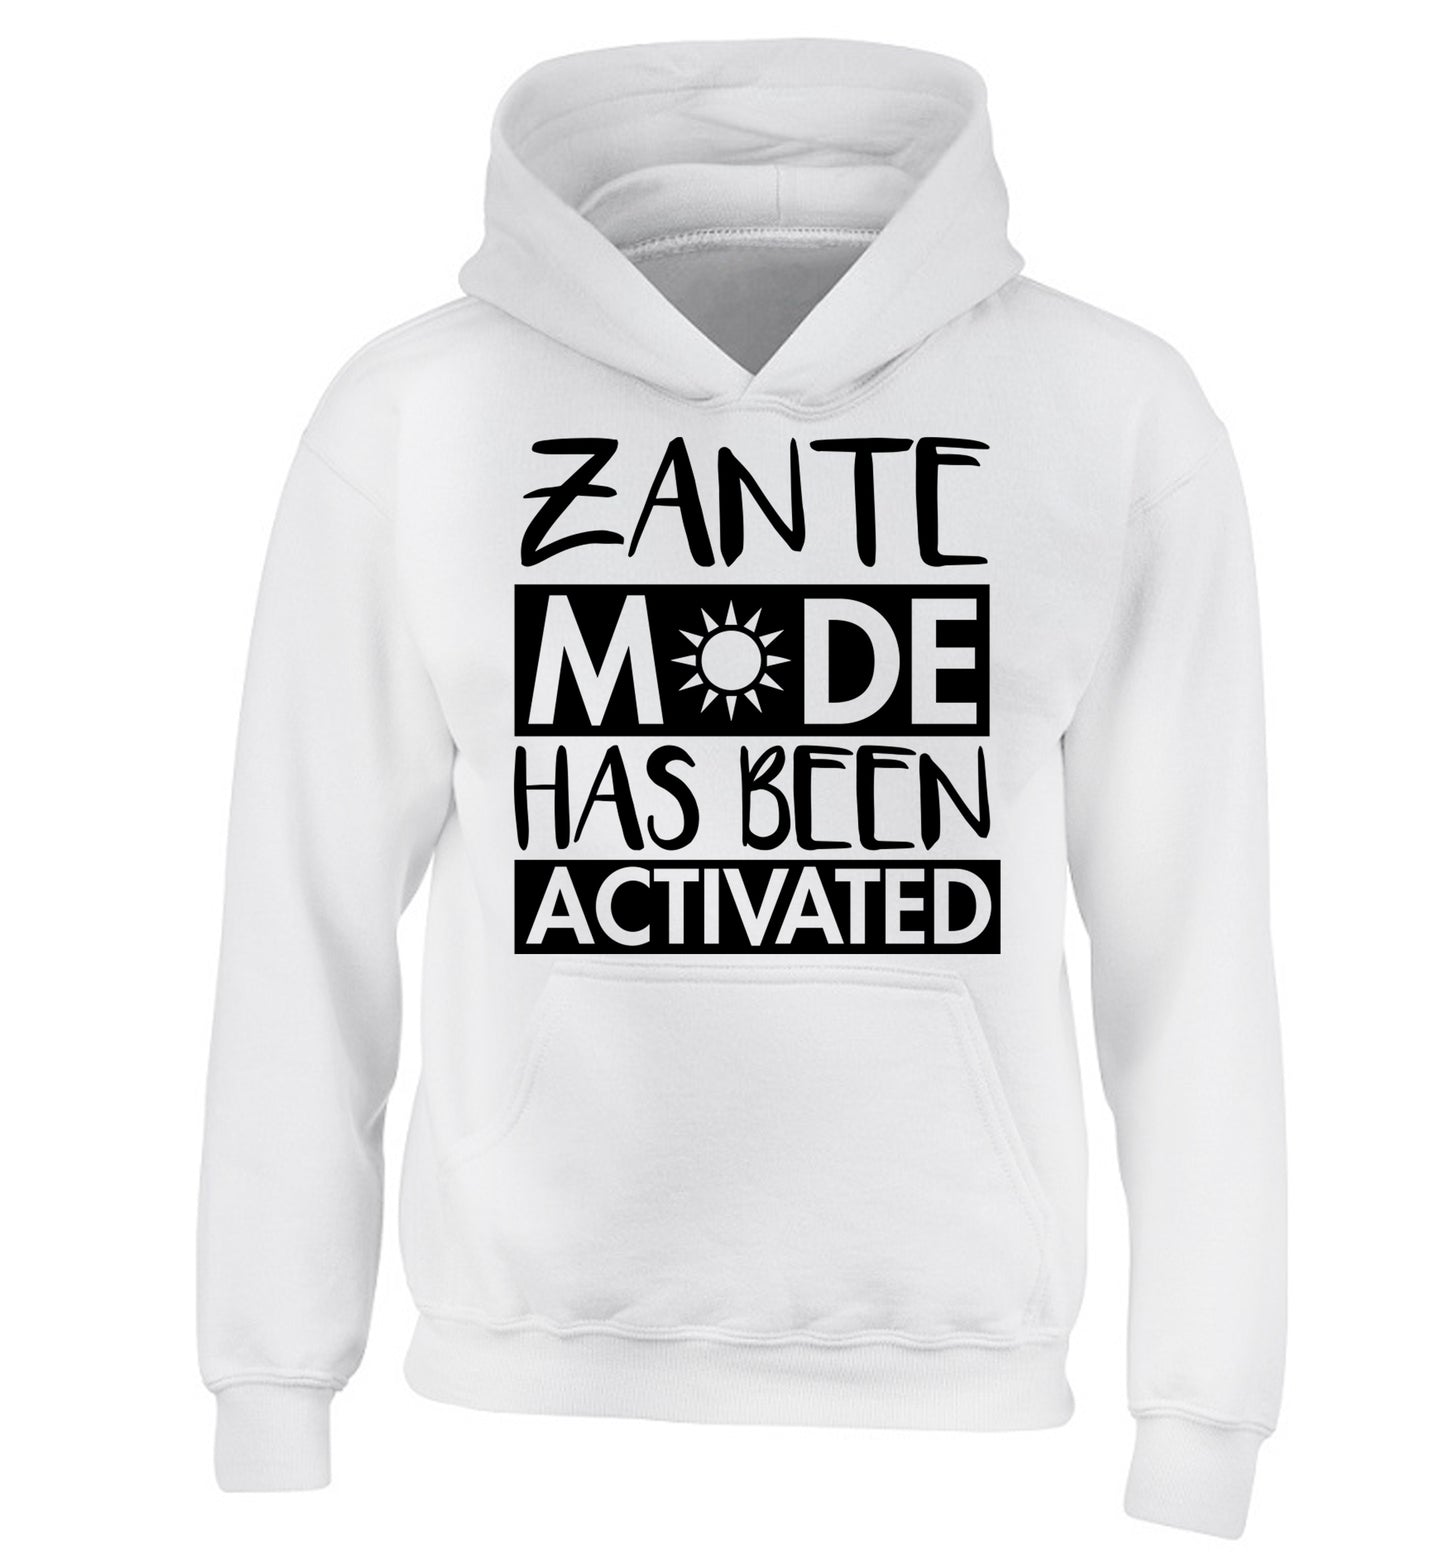 Zante mode has been activated children's white hoodie 12-13 Years